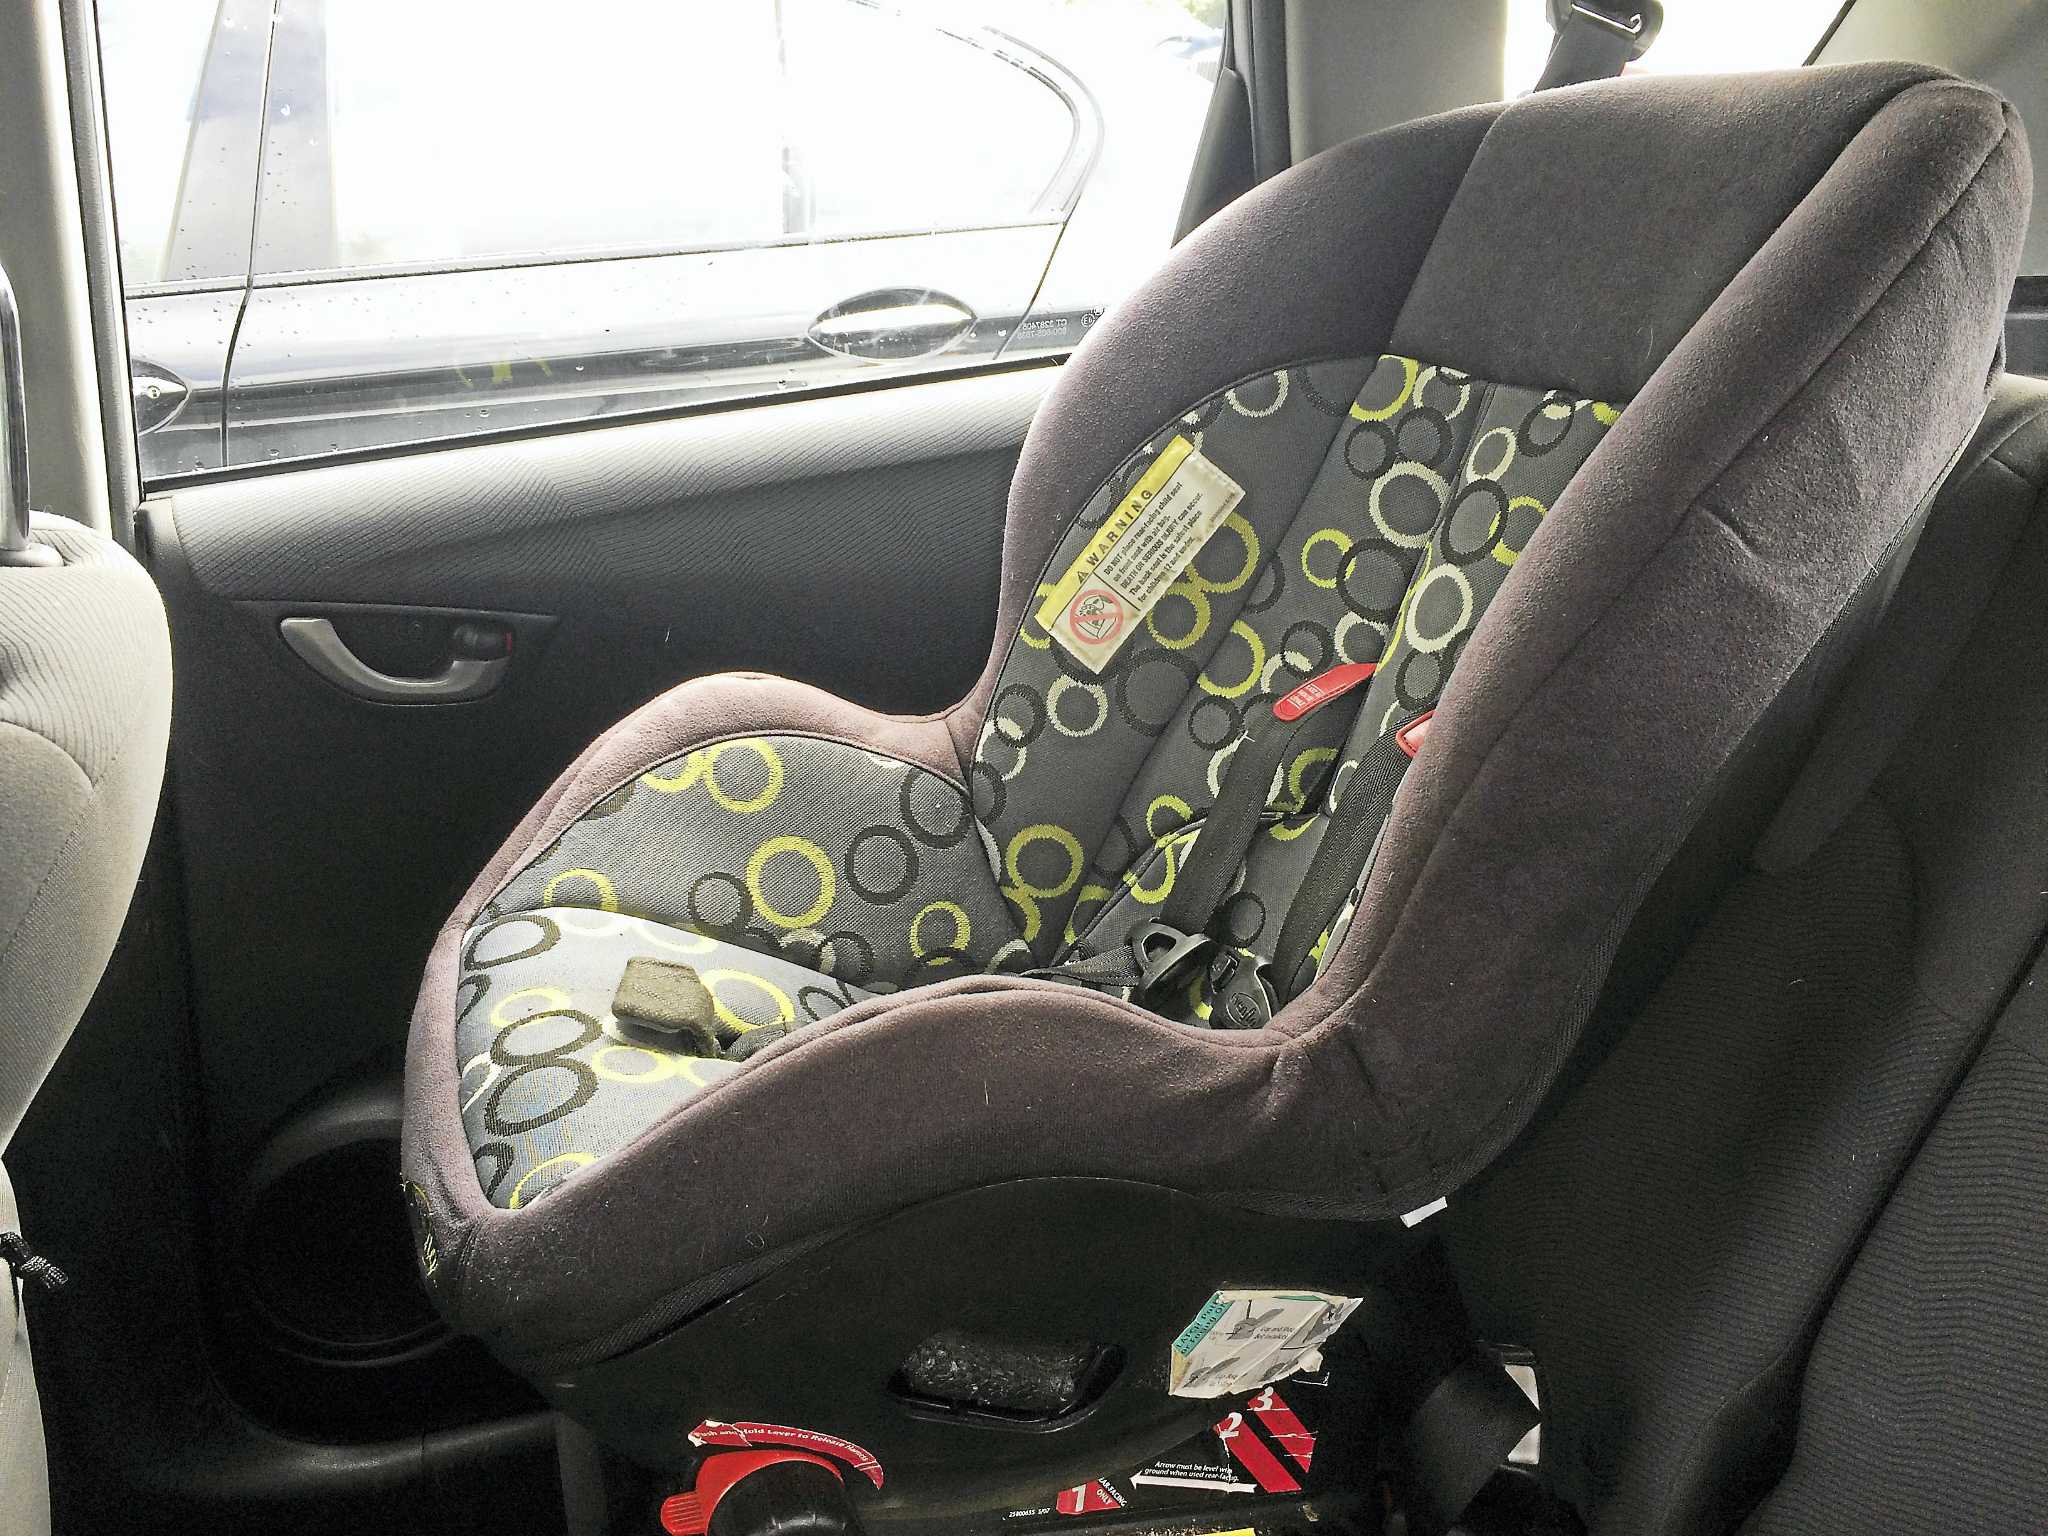 Law Changing For Child Safety Seats